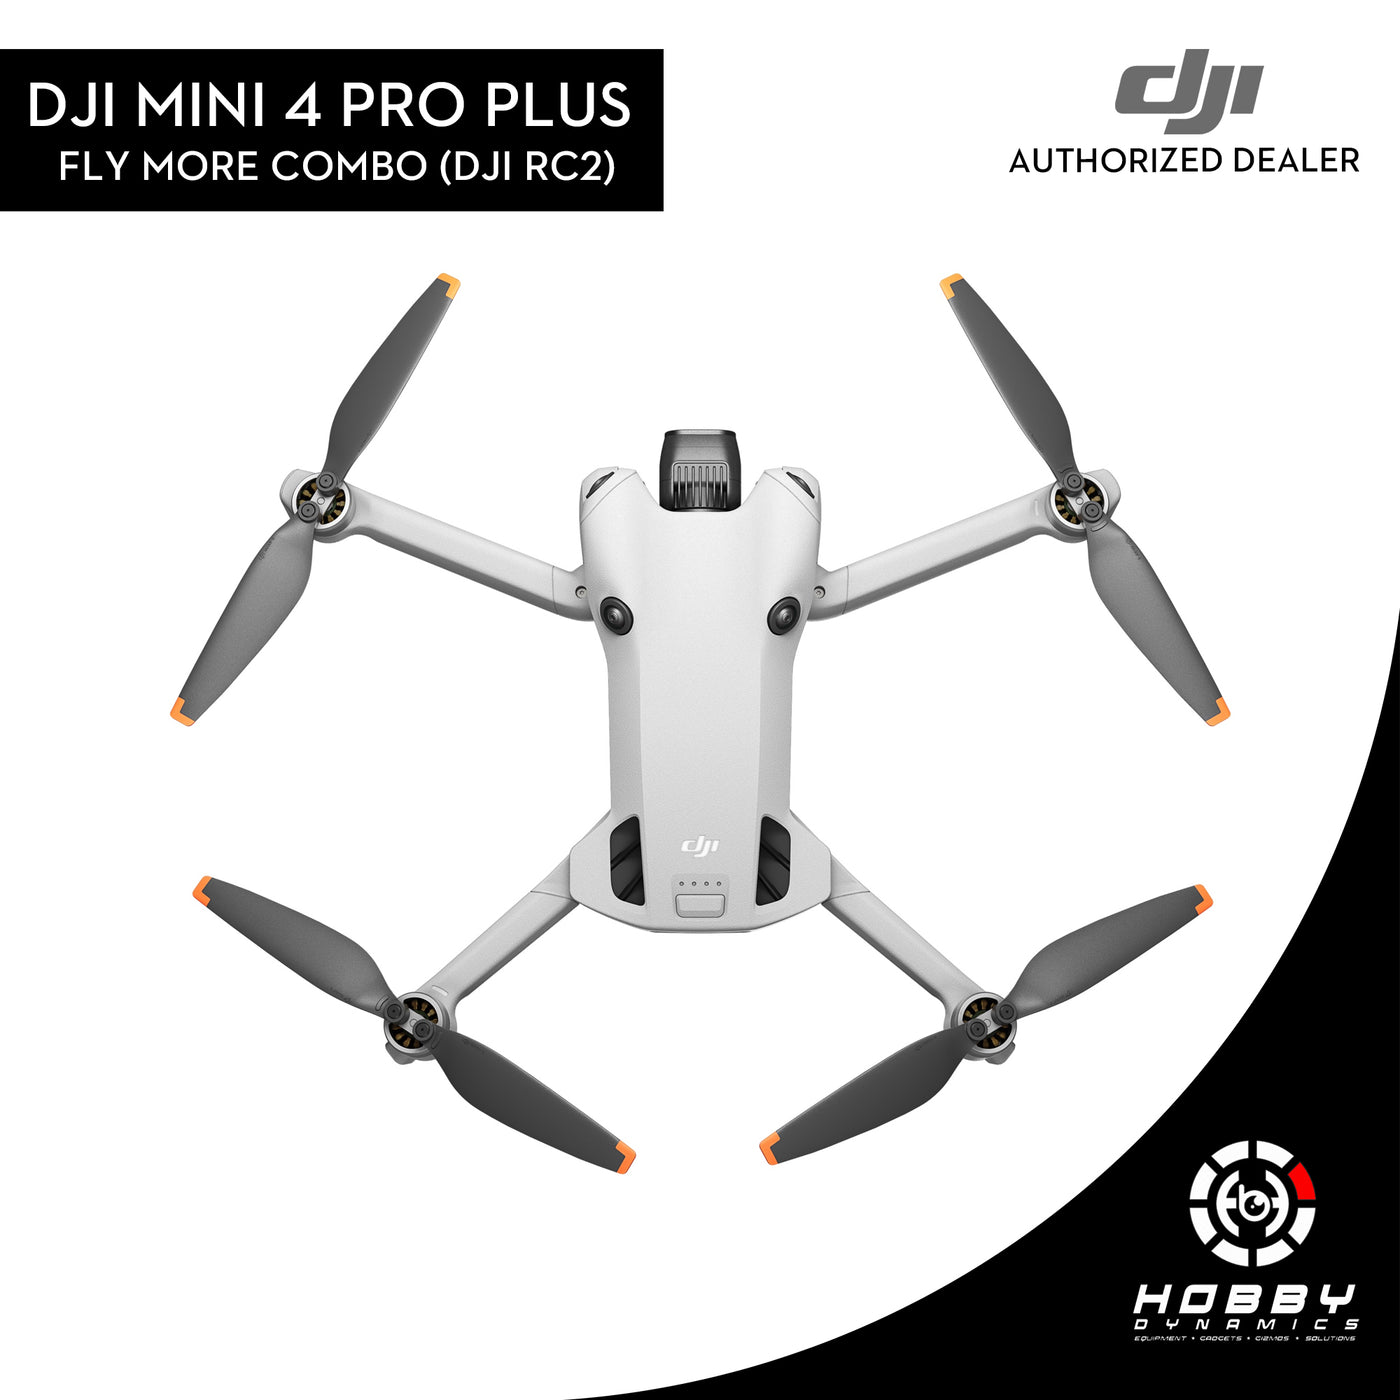 DJI Mini 4 Pro Fly More Combo Plus (DJI RC2) with FREE Sandisk Extreme 64GB SD Card